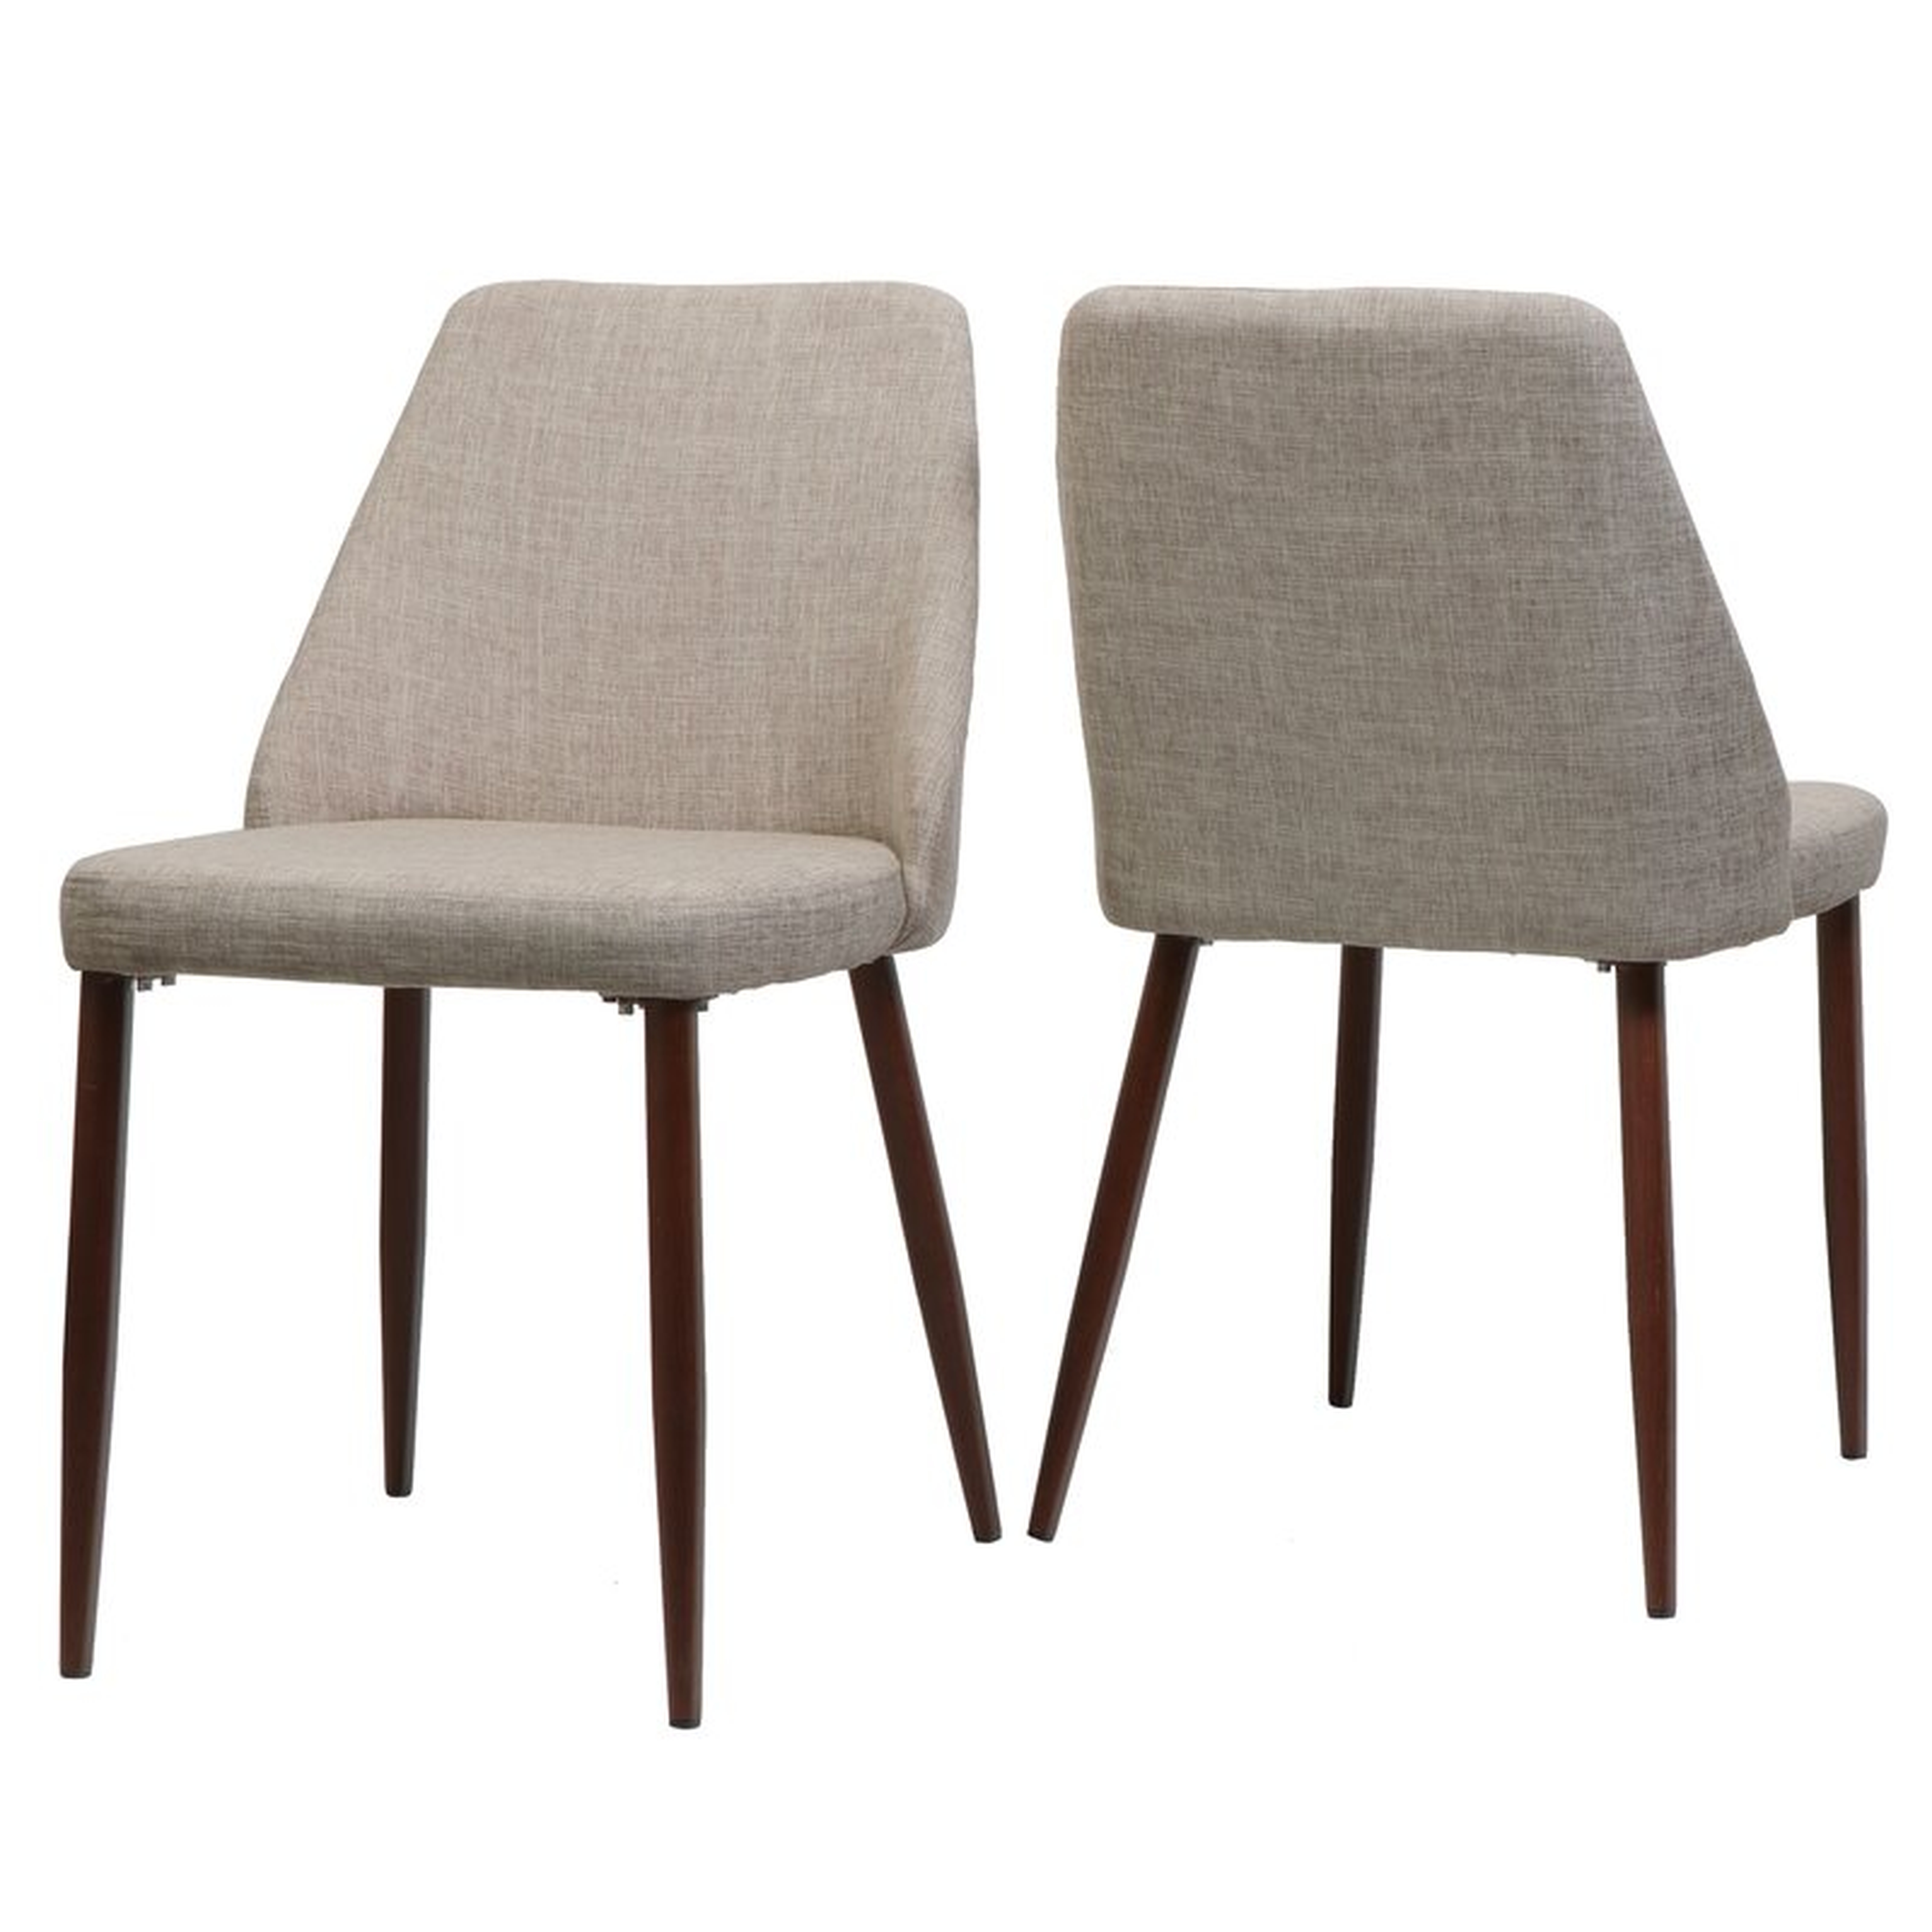 Dodrill Mid Century Upholstered Dining Chair, Wheat, Set of 2 - Wayfair